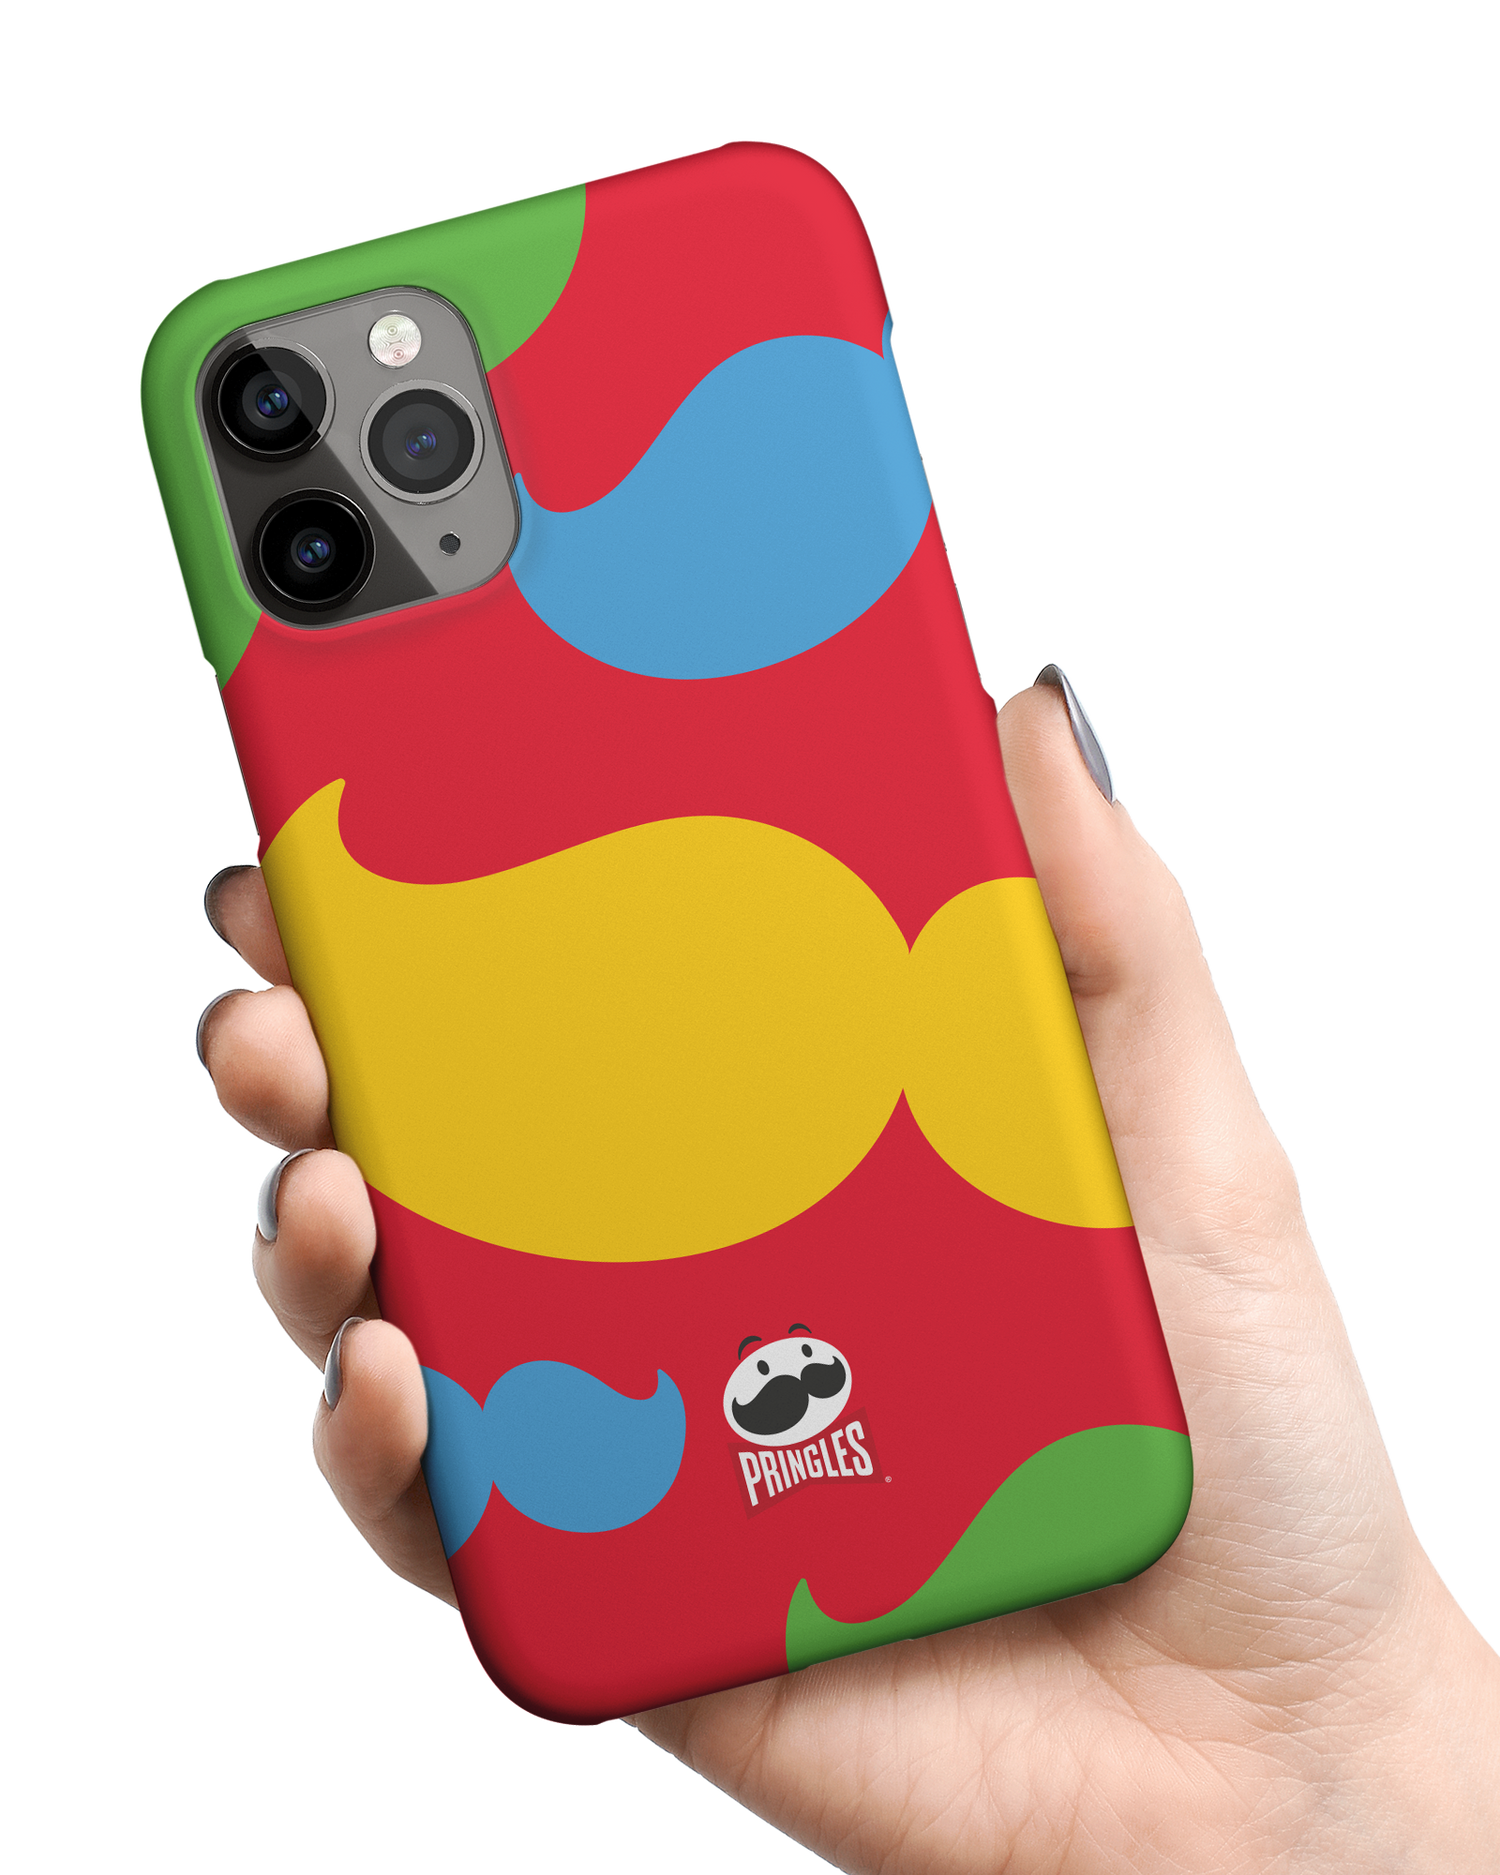 Pringles Moustache Hard Shell Phone Case Apple iPhone 11 Pro Max held in hand